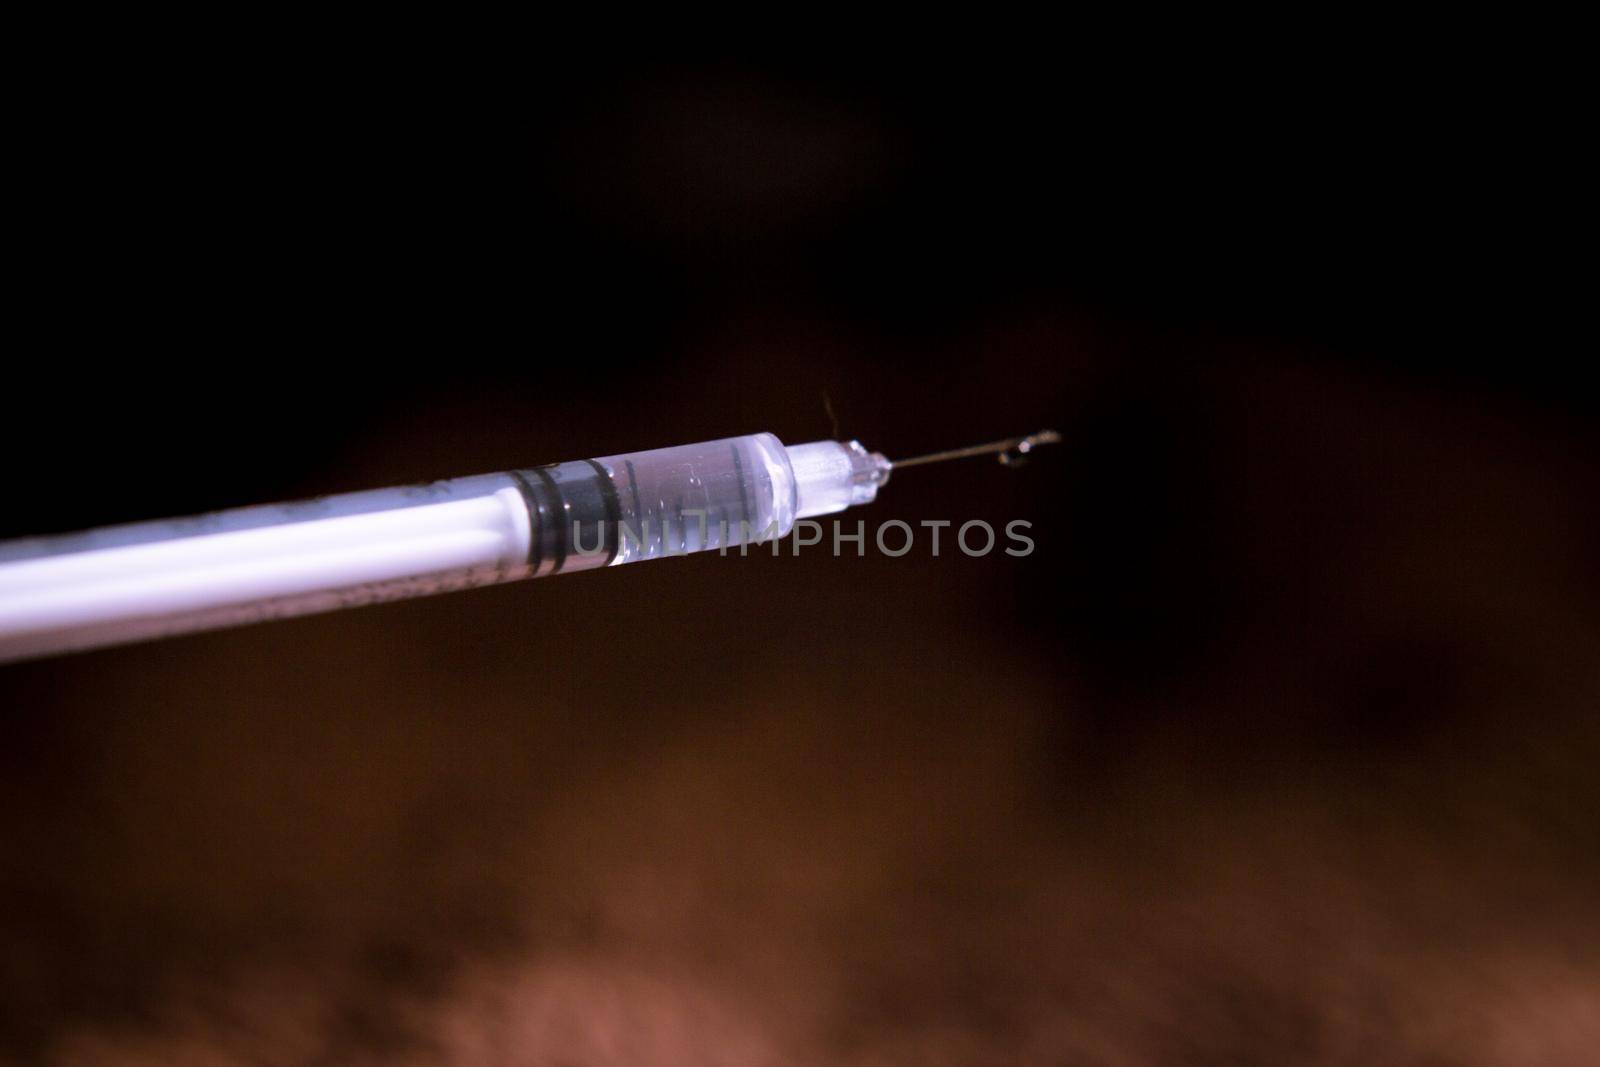 Insulin syringe for cats and dogs. No people